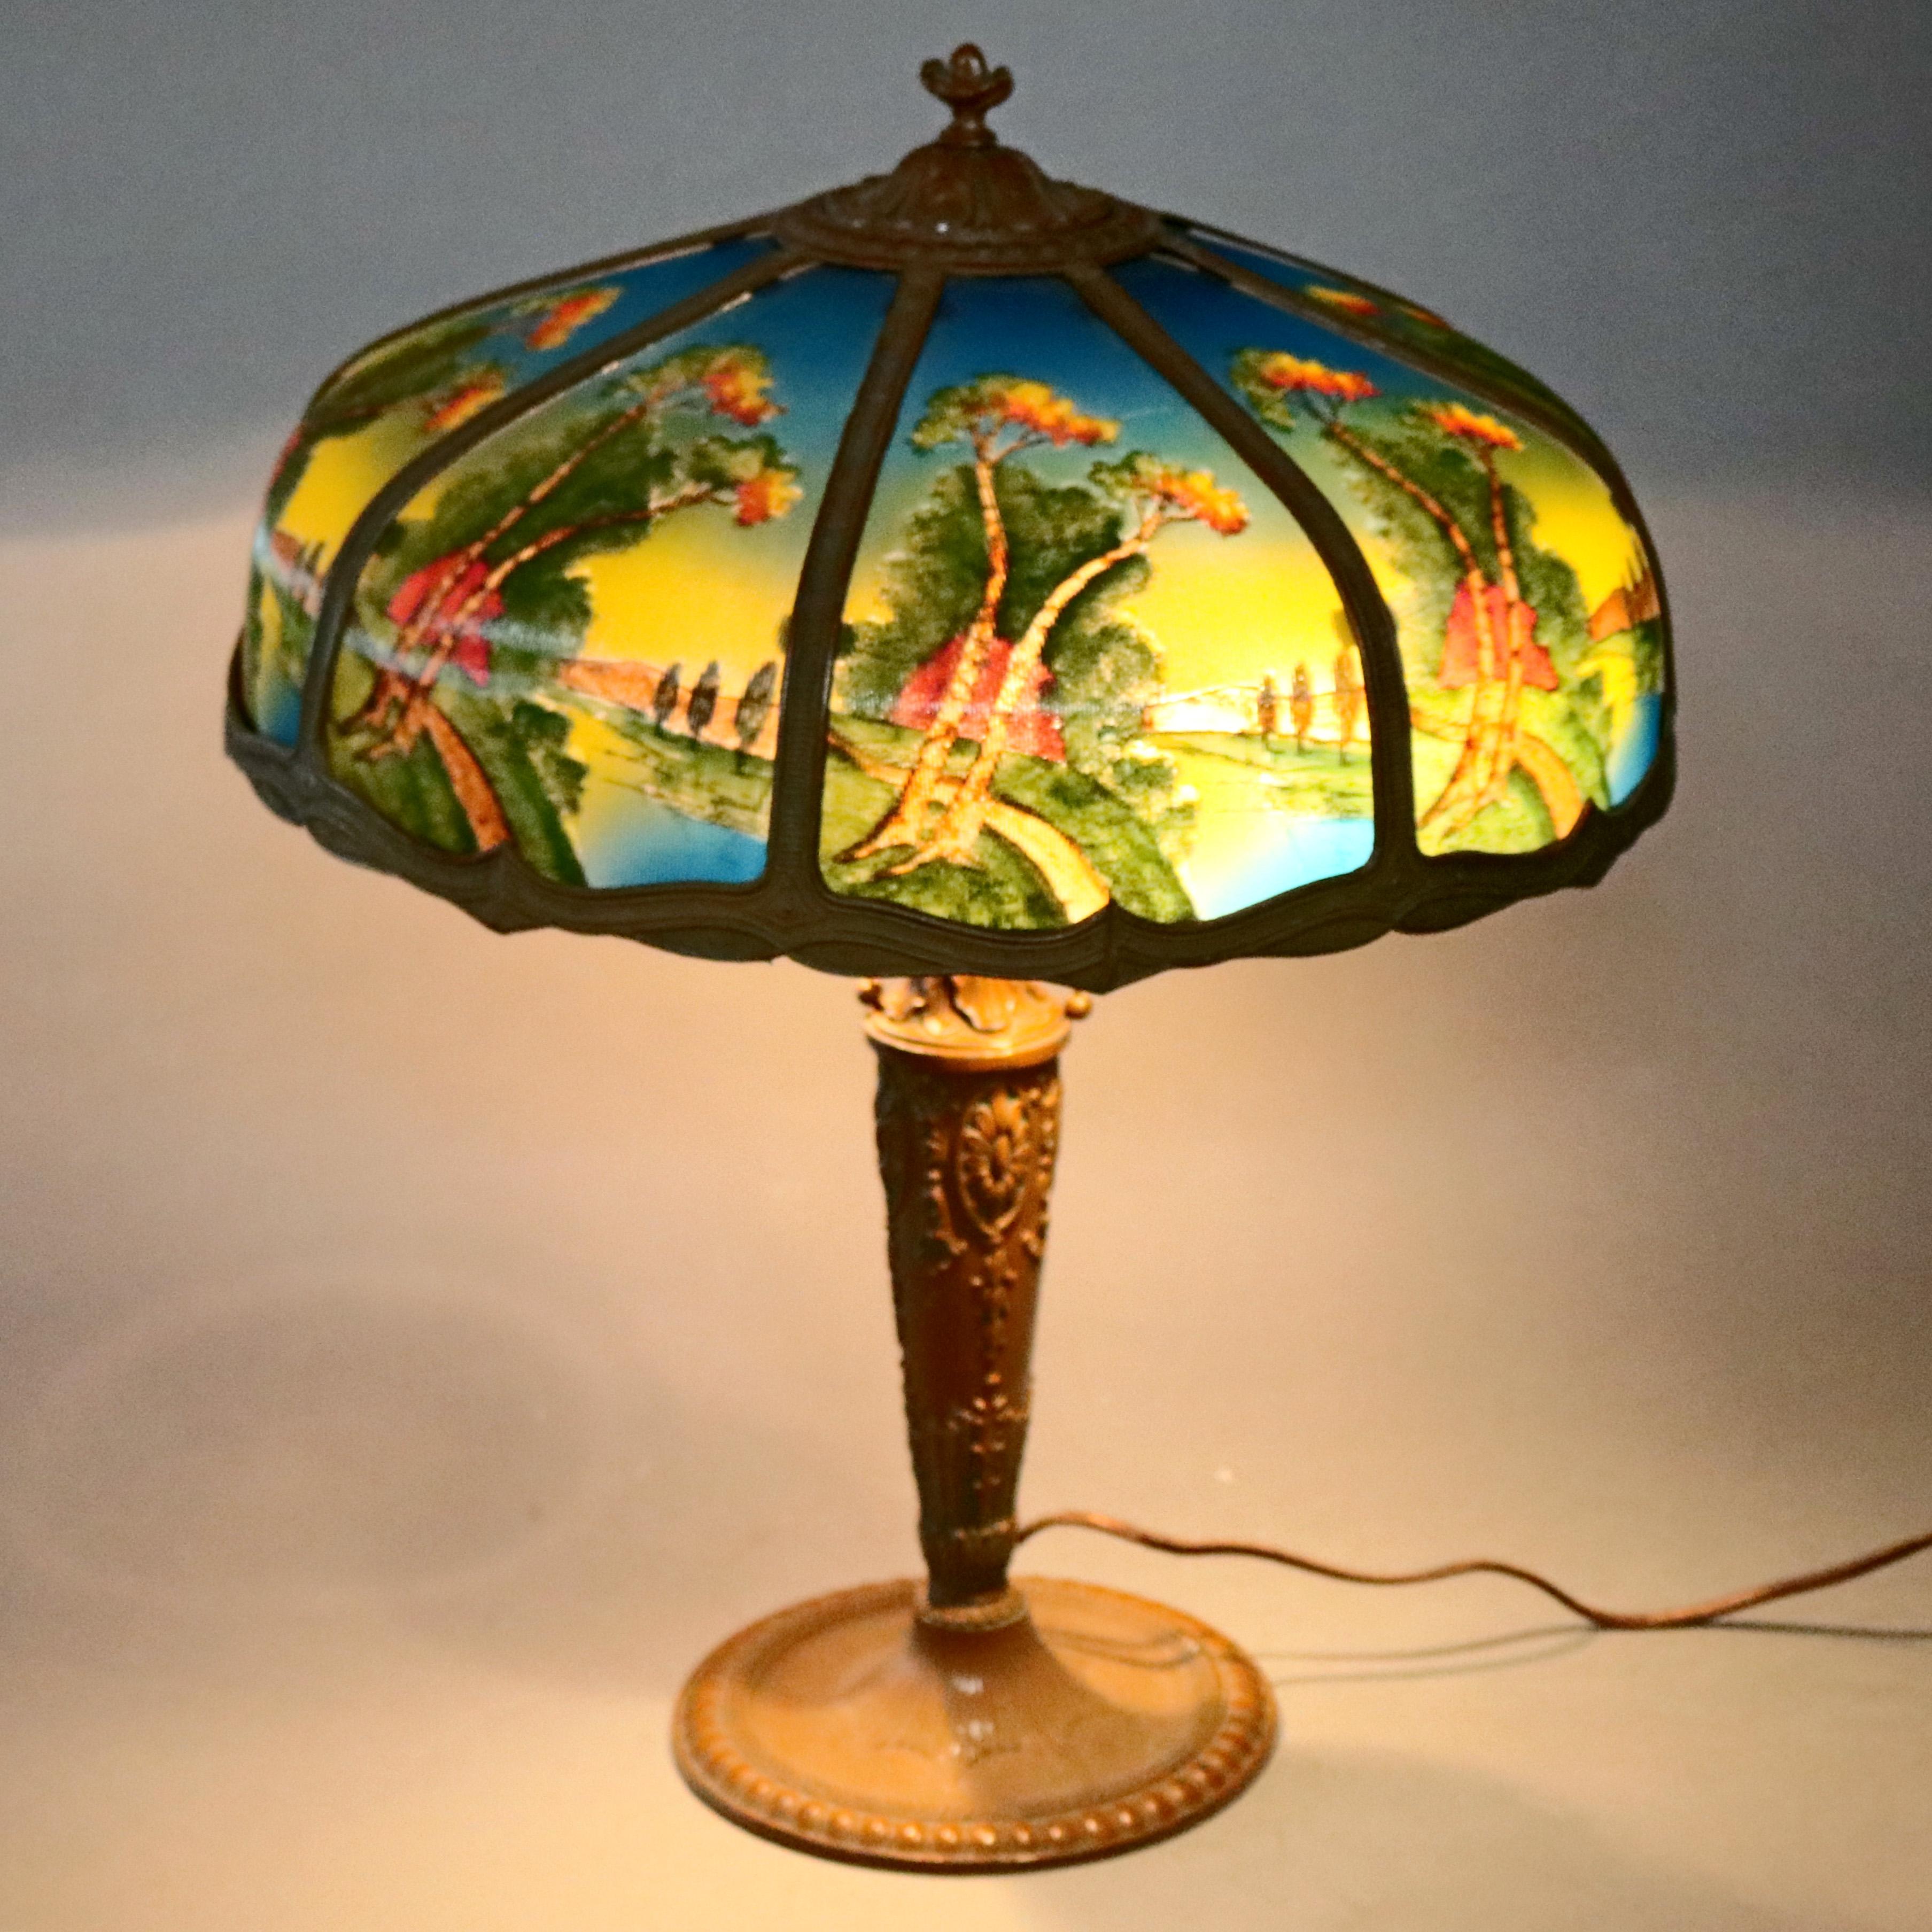 An antique Arts & Crafts Pittsburgh School table lamp offers a cast shade housing reverse painted ribbed glass panels depicting country side river scene and surmounting cast urn form base having embossed floral elements with inverted bellflowers and